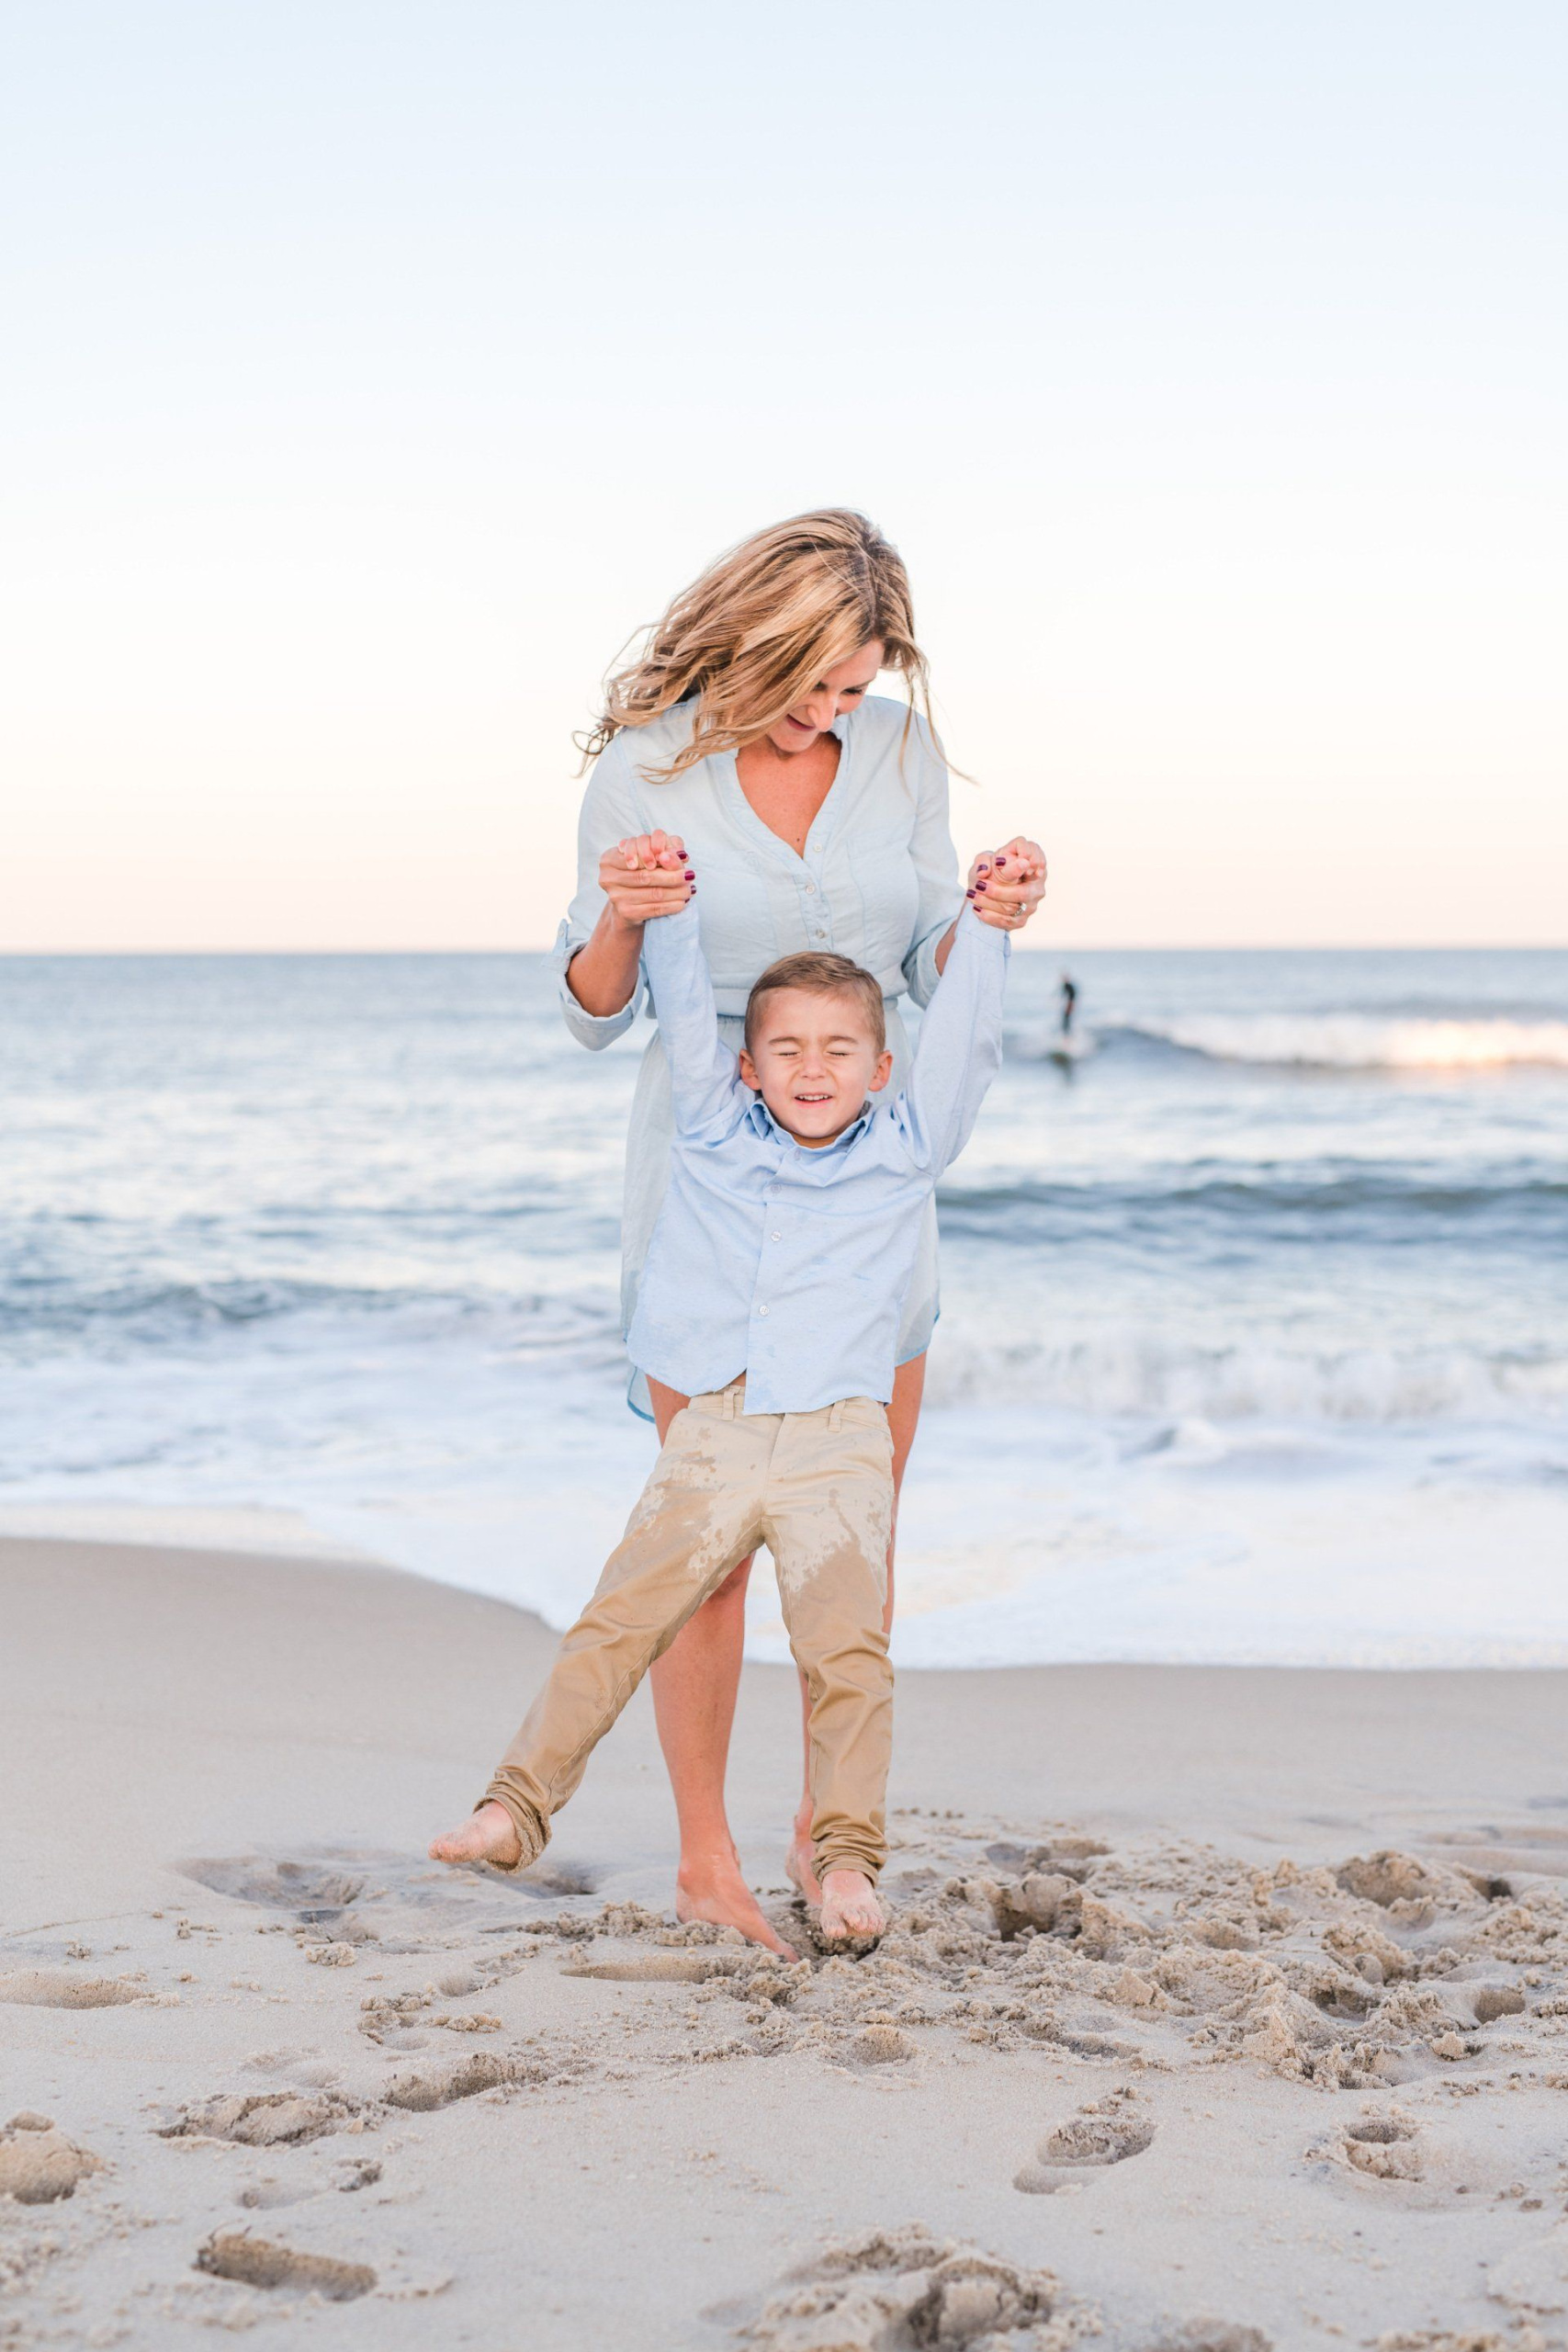 Women's health specialist Dr. Kimberly with her young son playing on the beach.